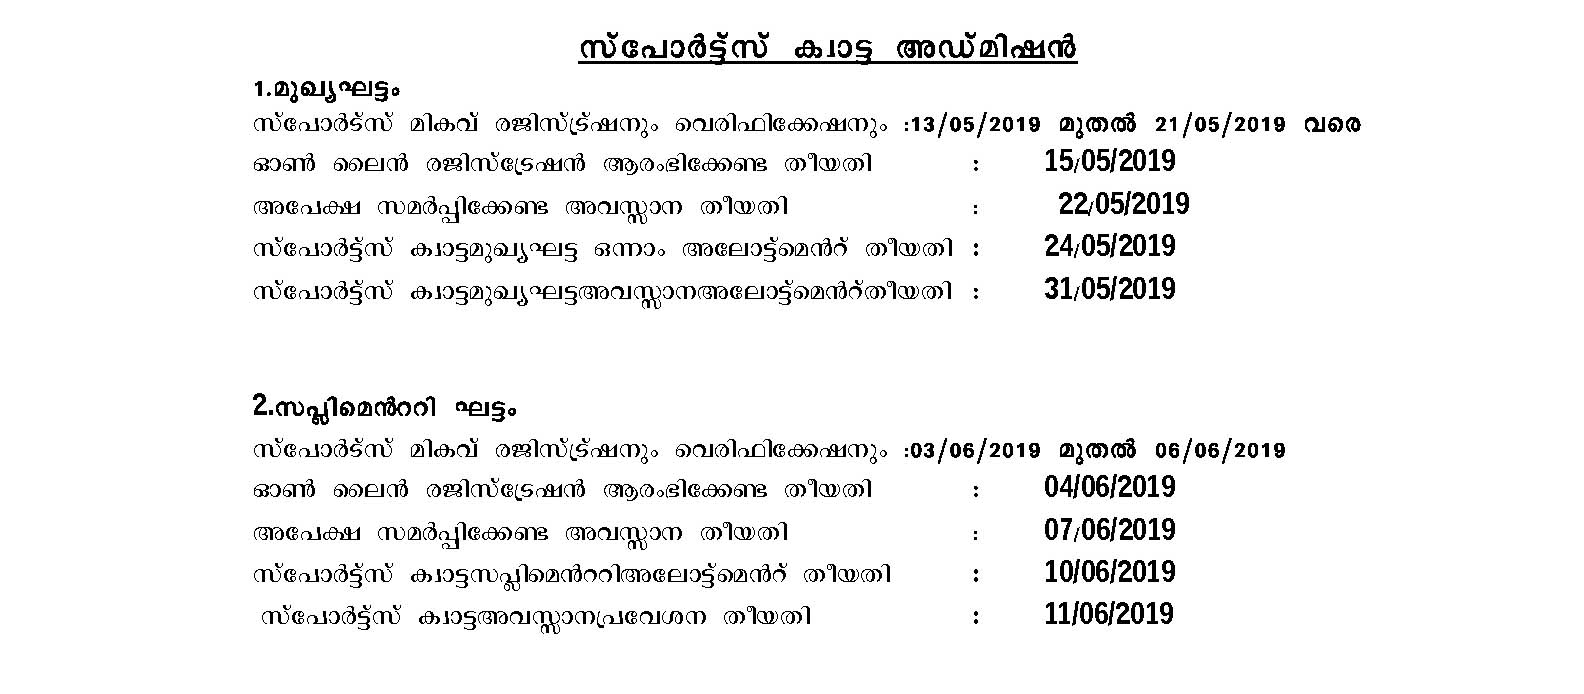 Plus 1 Seat Availability in Schools of Kerala for 2018 2019 Batch - Notification Image 9